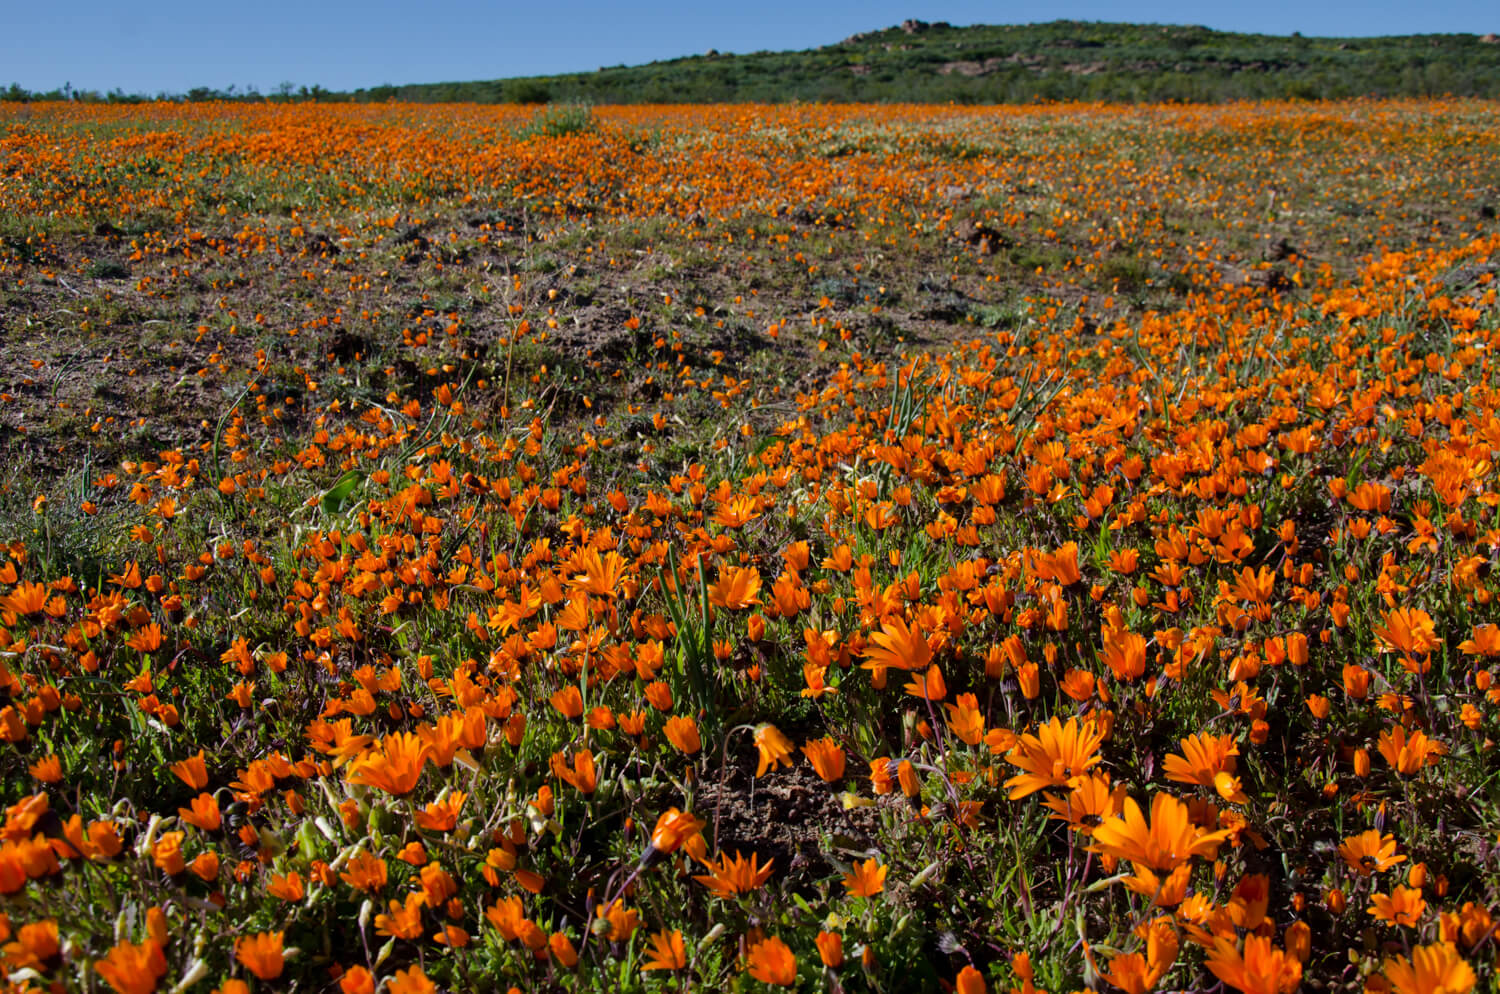 Blooming fantastic: a guide to South Africa’s spring flowers